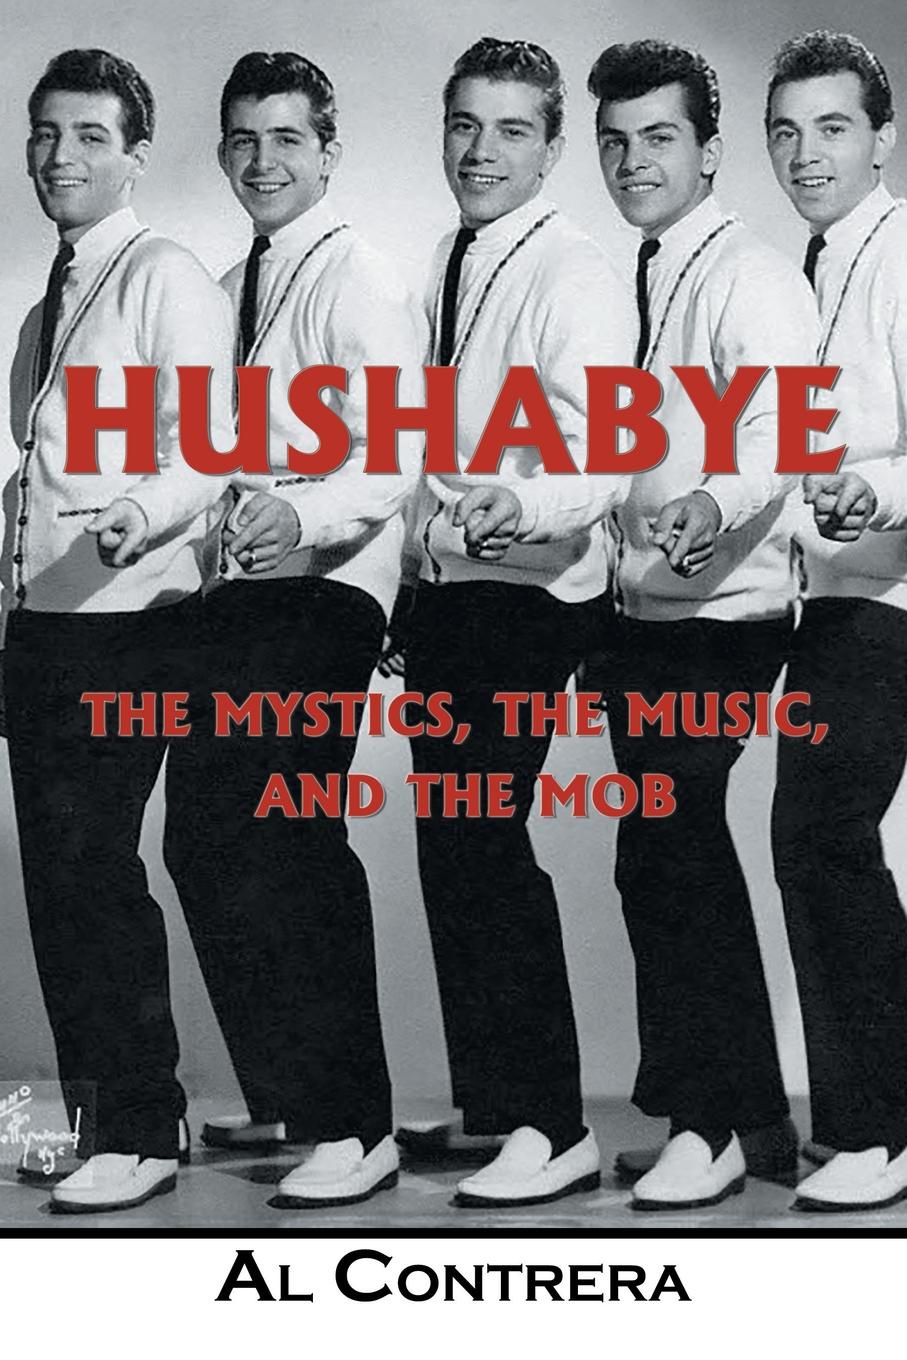 Hushabye. The Mystics, the Music, and the Mob